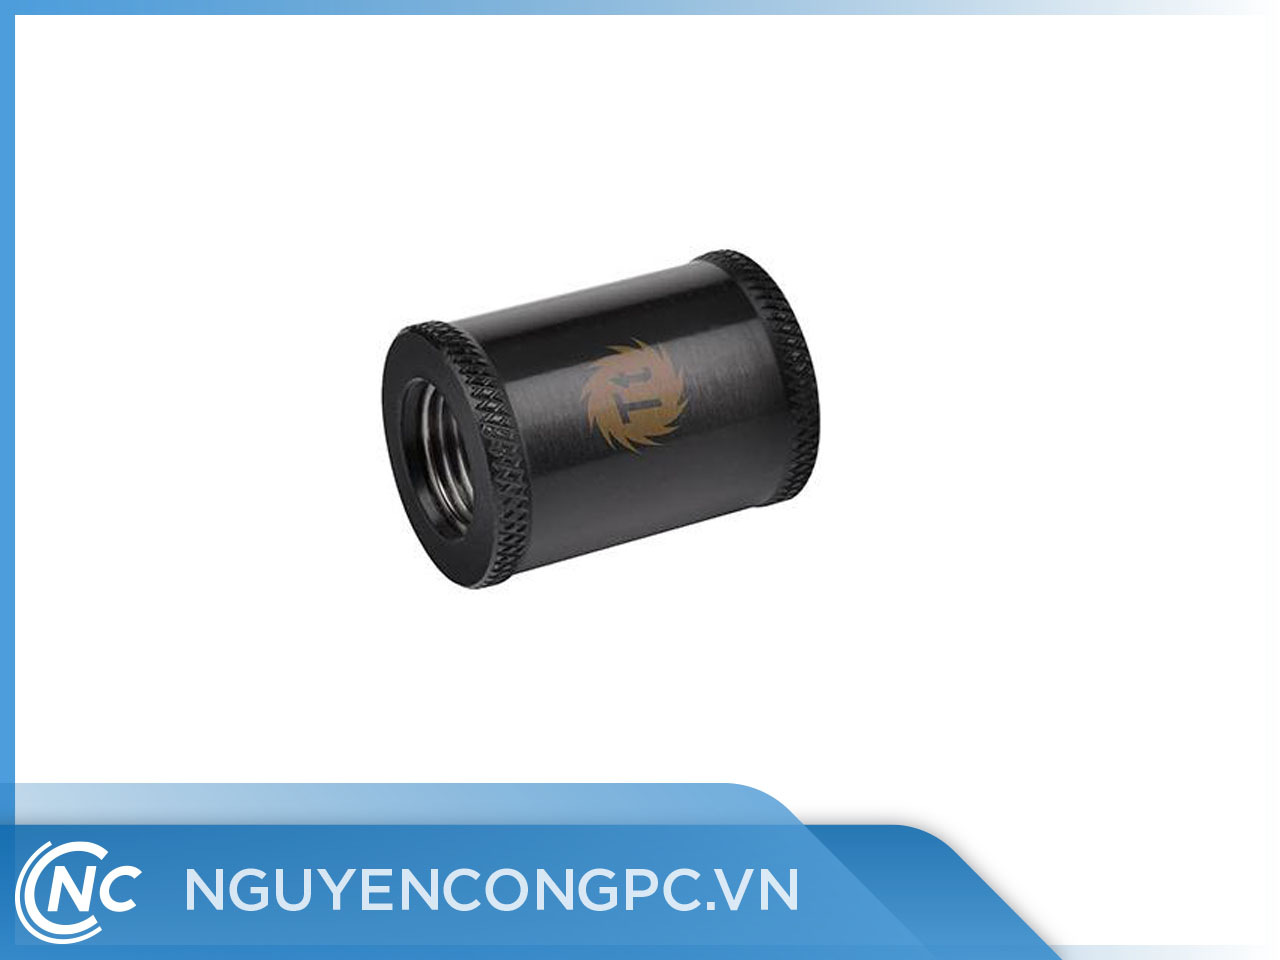 Ống nối Pacific G1/4 Female to Female 30mm Extender-Black CL-W050-CU00BL-A Thermaltake